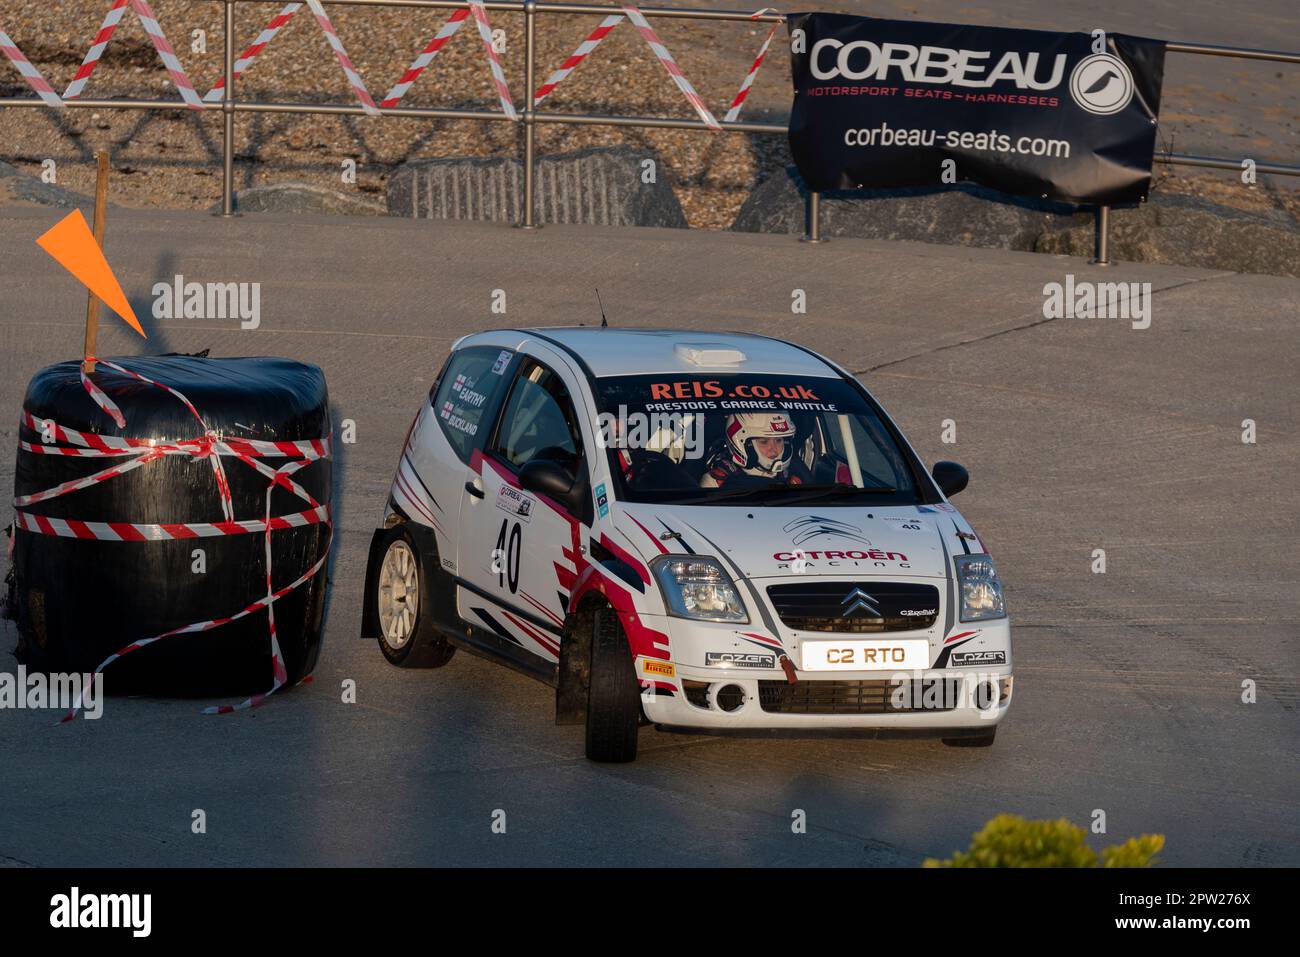 David Earthy racing a Citroen C2 R2 Max competing in the Corbeau Seats rally on the seafront at Clacton on Sea, Essex, UK. Co driver Sophie Buckland Stock Photo